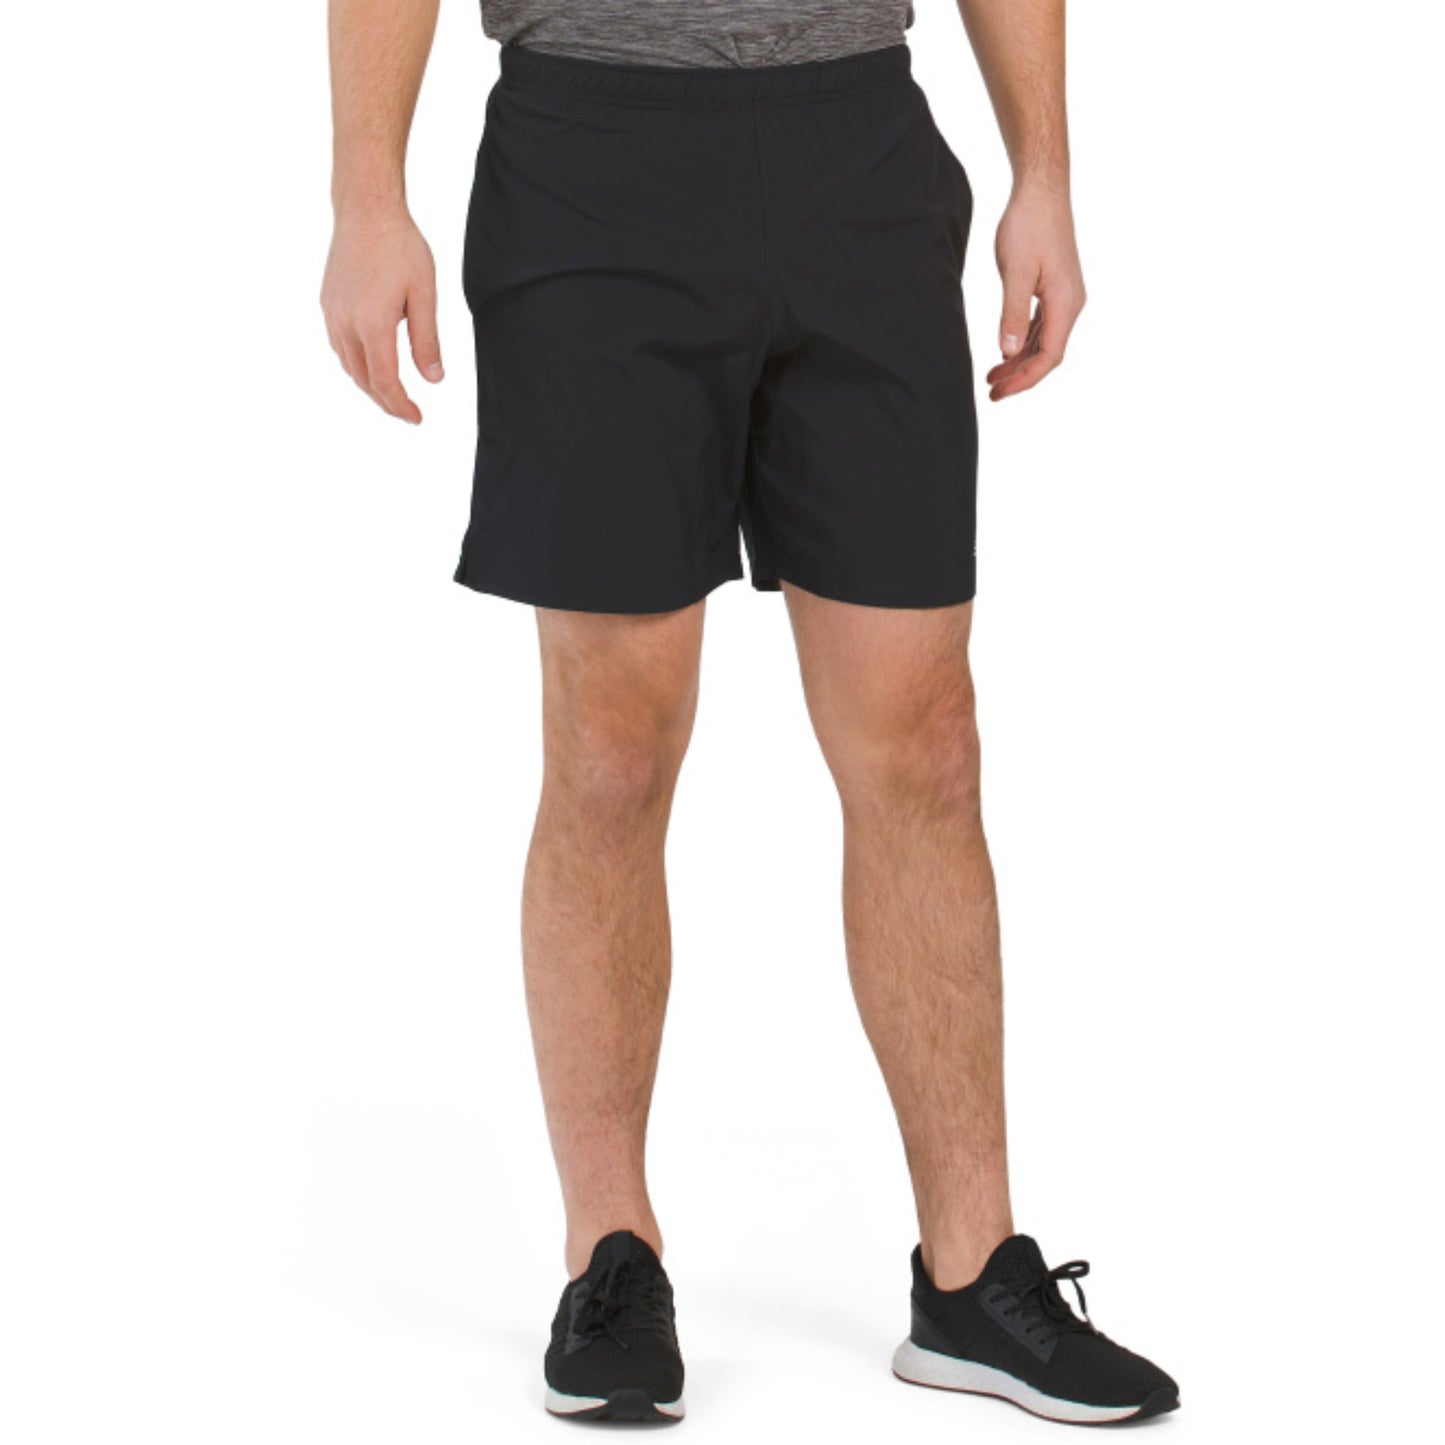 New Balance Men's Athletic Moisture Wicking Built-in Briefs Active 7" Core Run Shorts